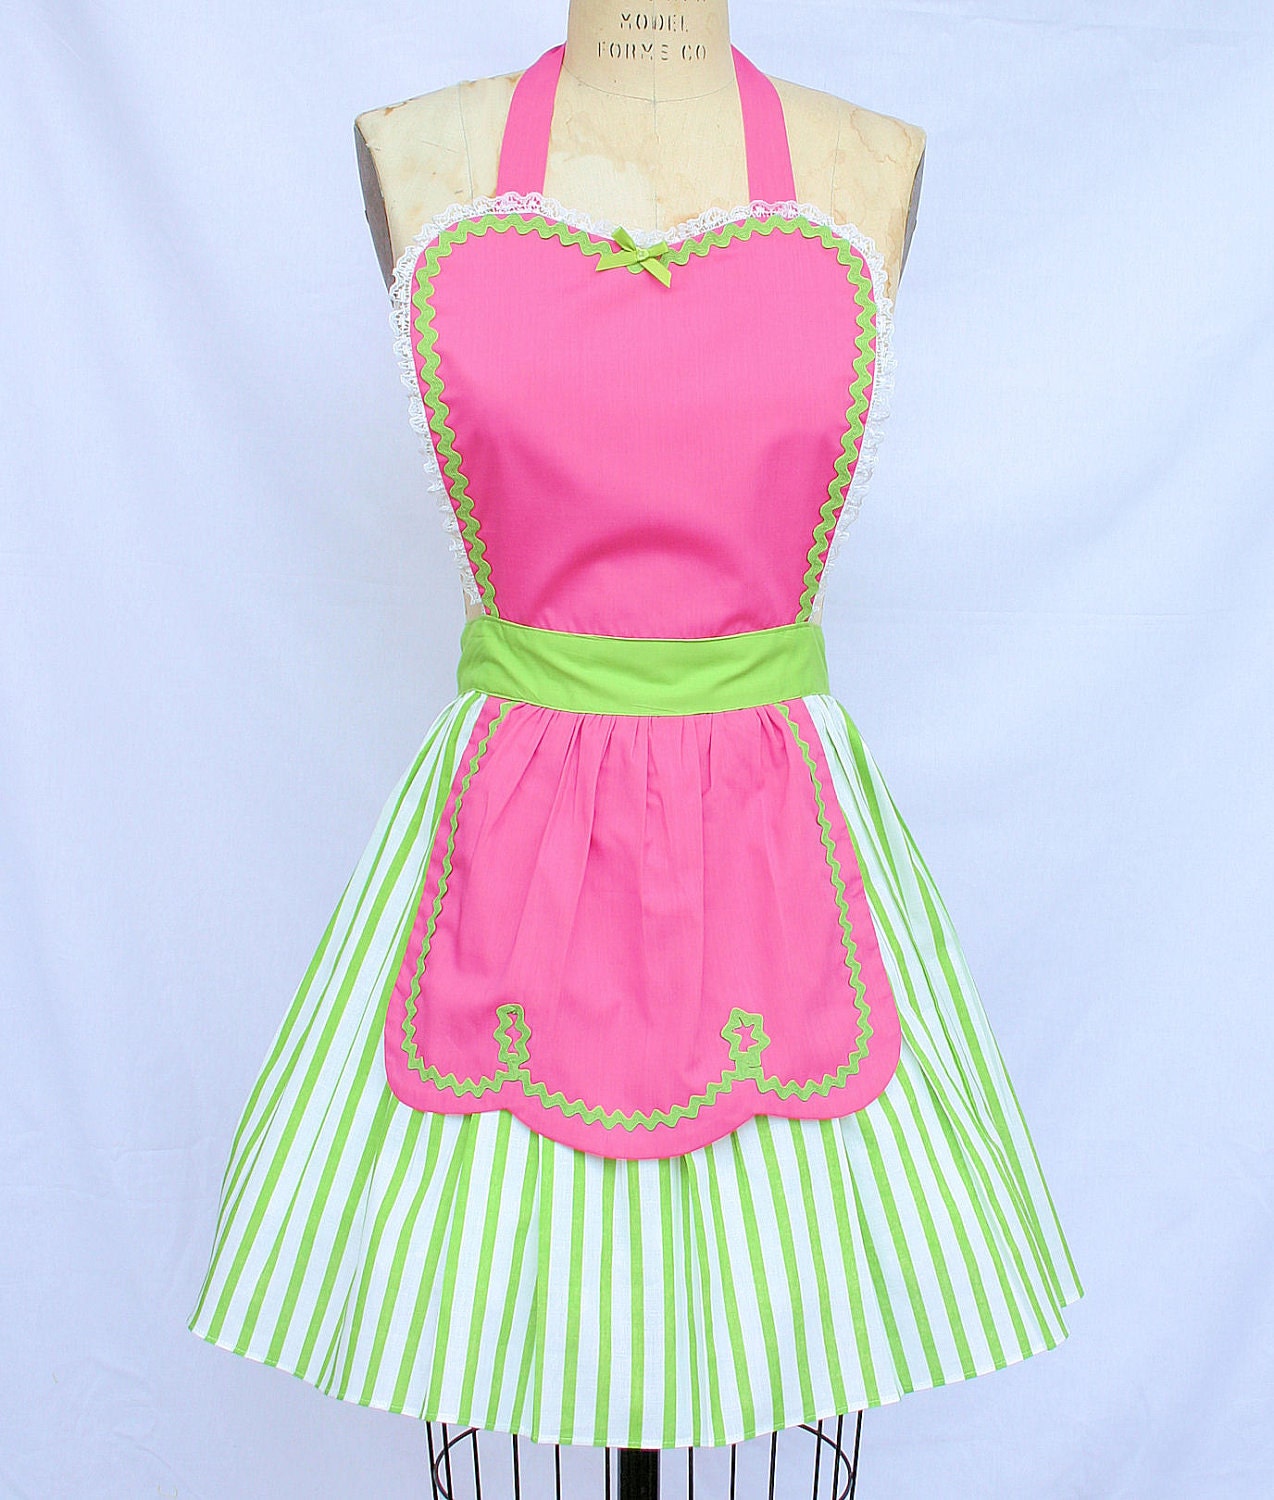 FIFTIES Diner Waitress RETRO turq PINK womens full apron ice cream parlor sexy hostess bridal shower gift vintage inspired Candy shop